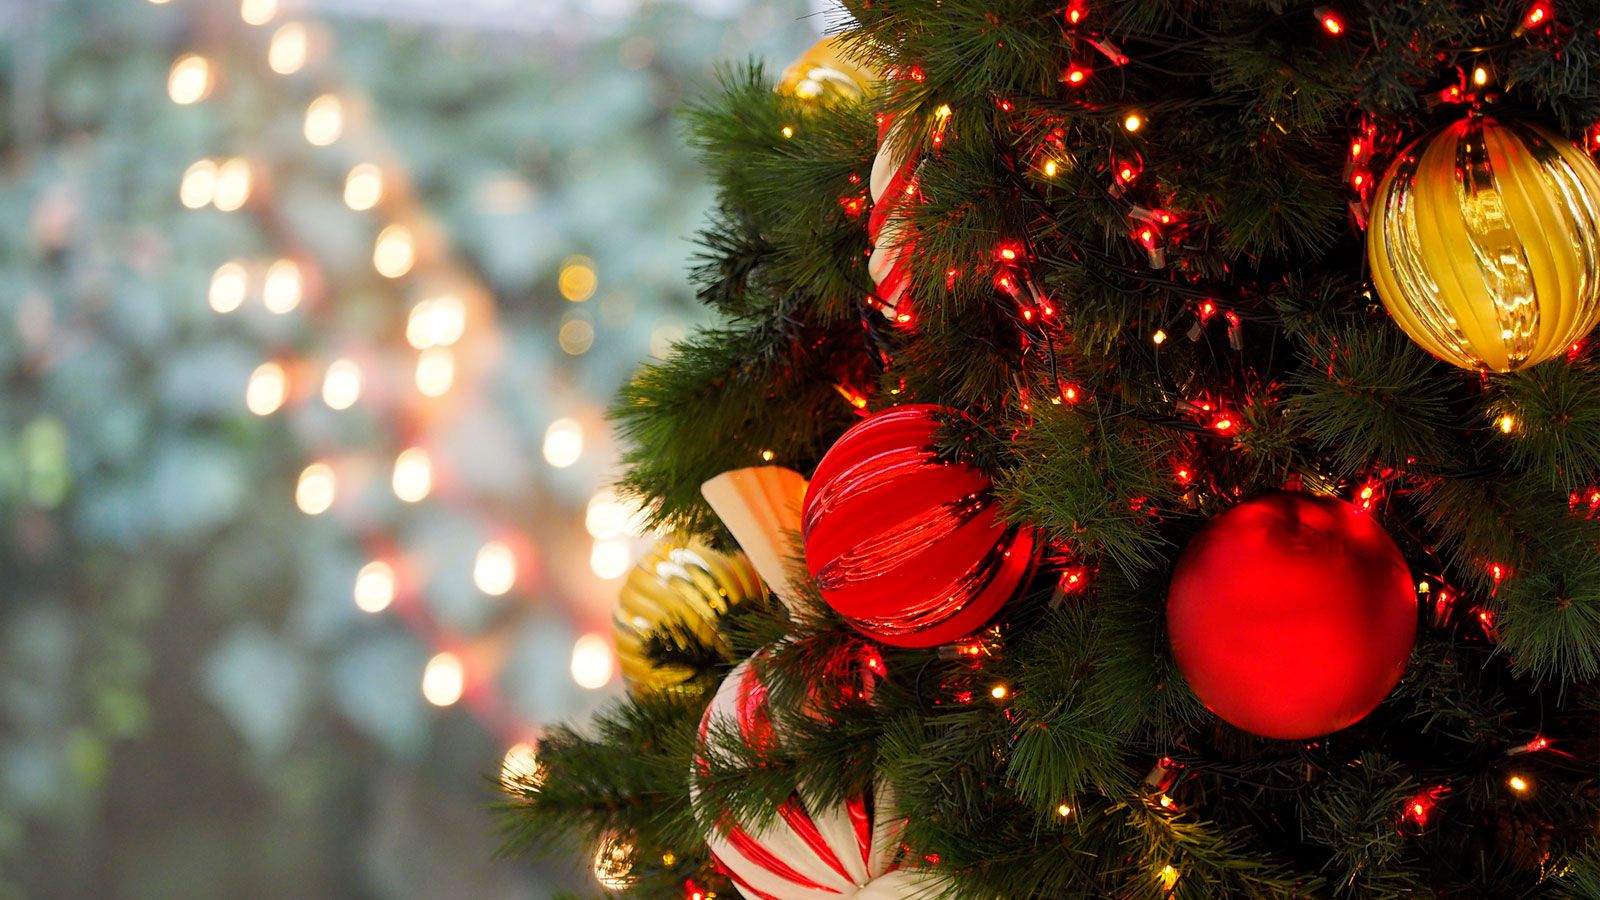 Localization of Christmas: How holiday greetings differ from country to ...